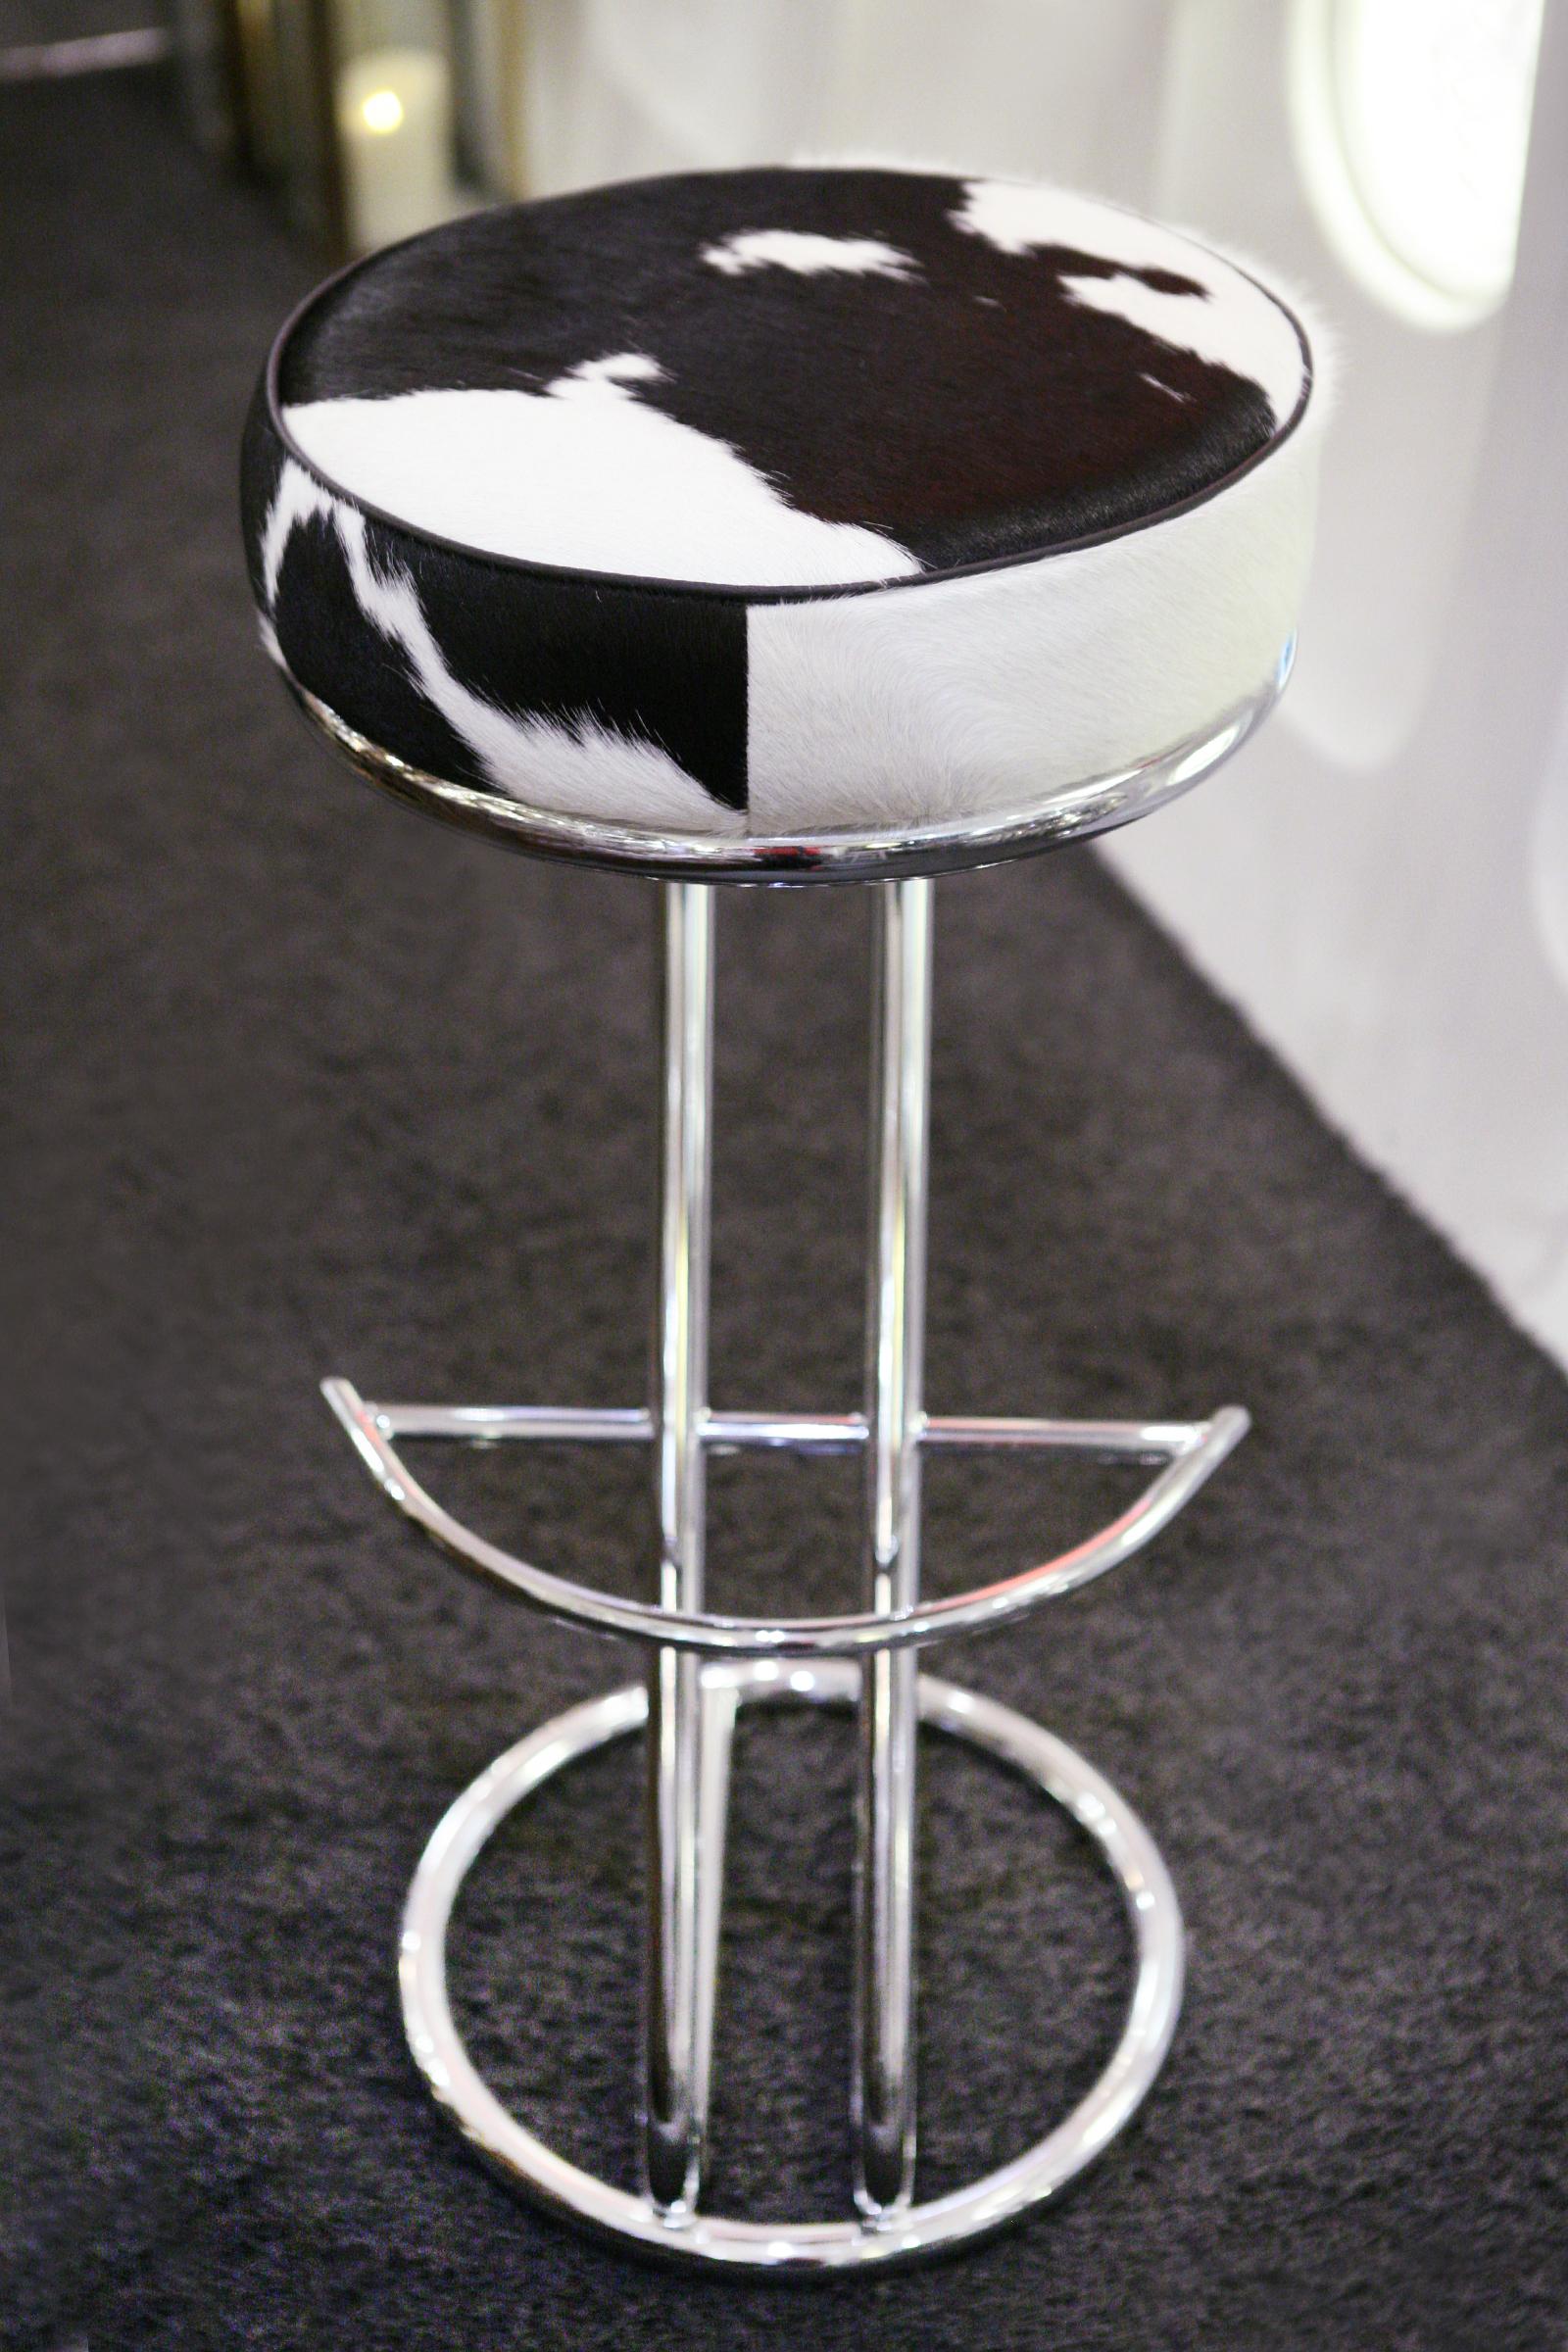 Hand-Crafted Pony 2 Bar Stool with Polished Stainless Steel Base